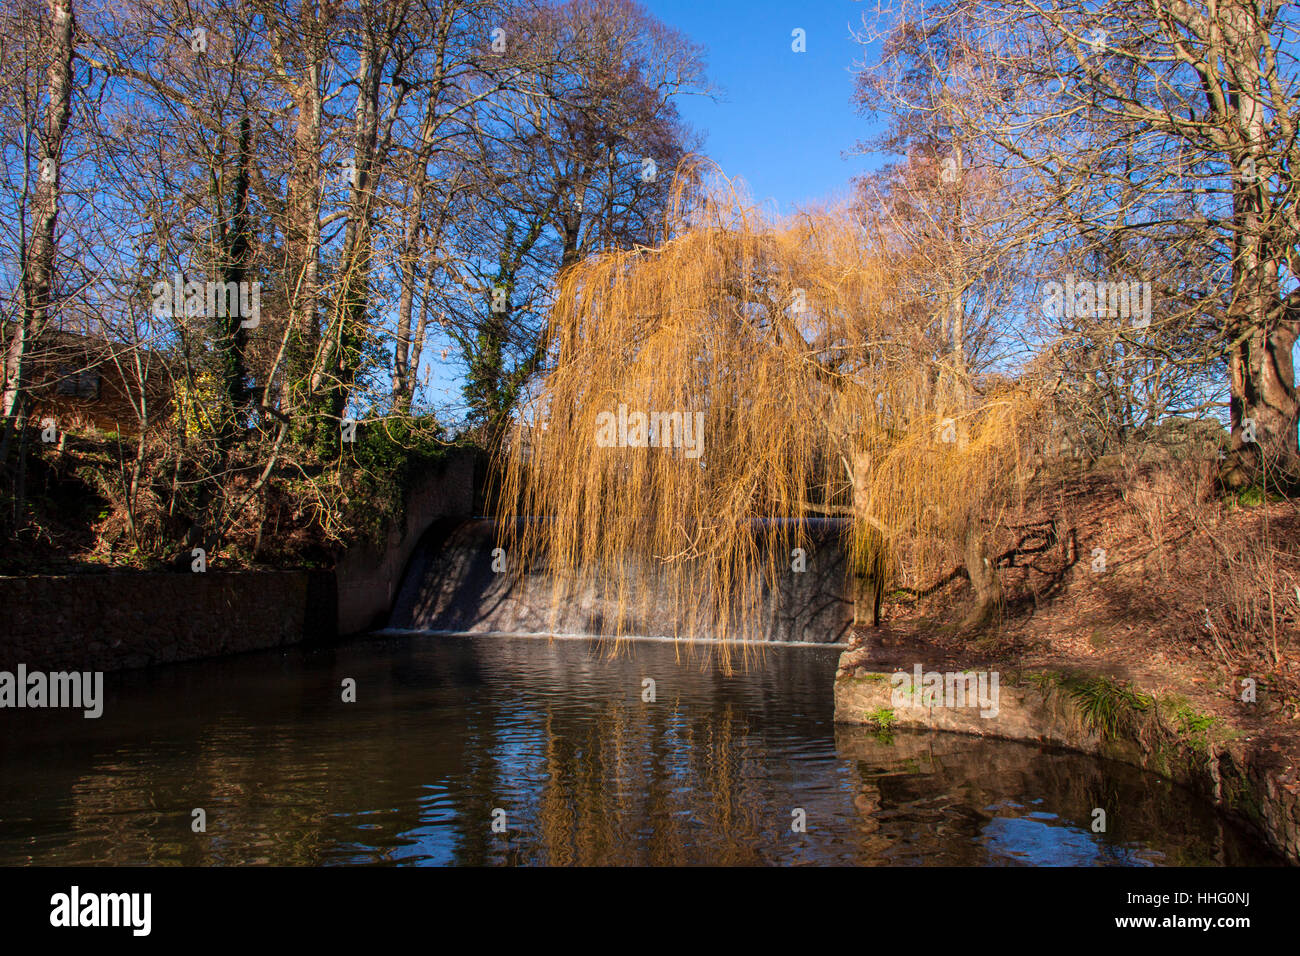 Sidmouth, Devon, UK. 19th Jan, 2017 After such a mild winter, the willow trees are already beginning to colour up ready for spring, as seen here on the River Sid at Sidmouth beside the town weir. Photo: Tony Charnock / Alamy Live News. Stock Photo